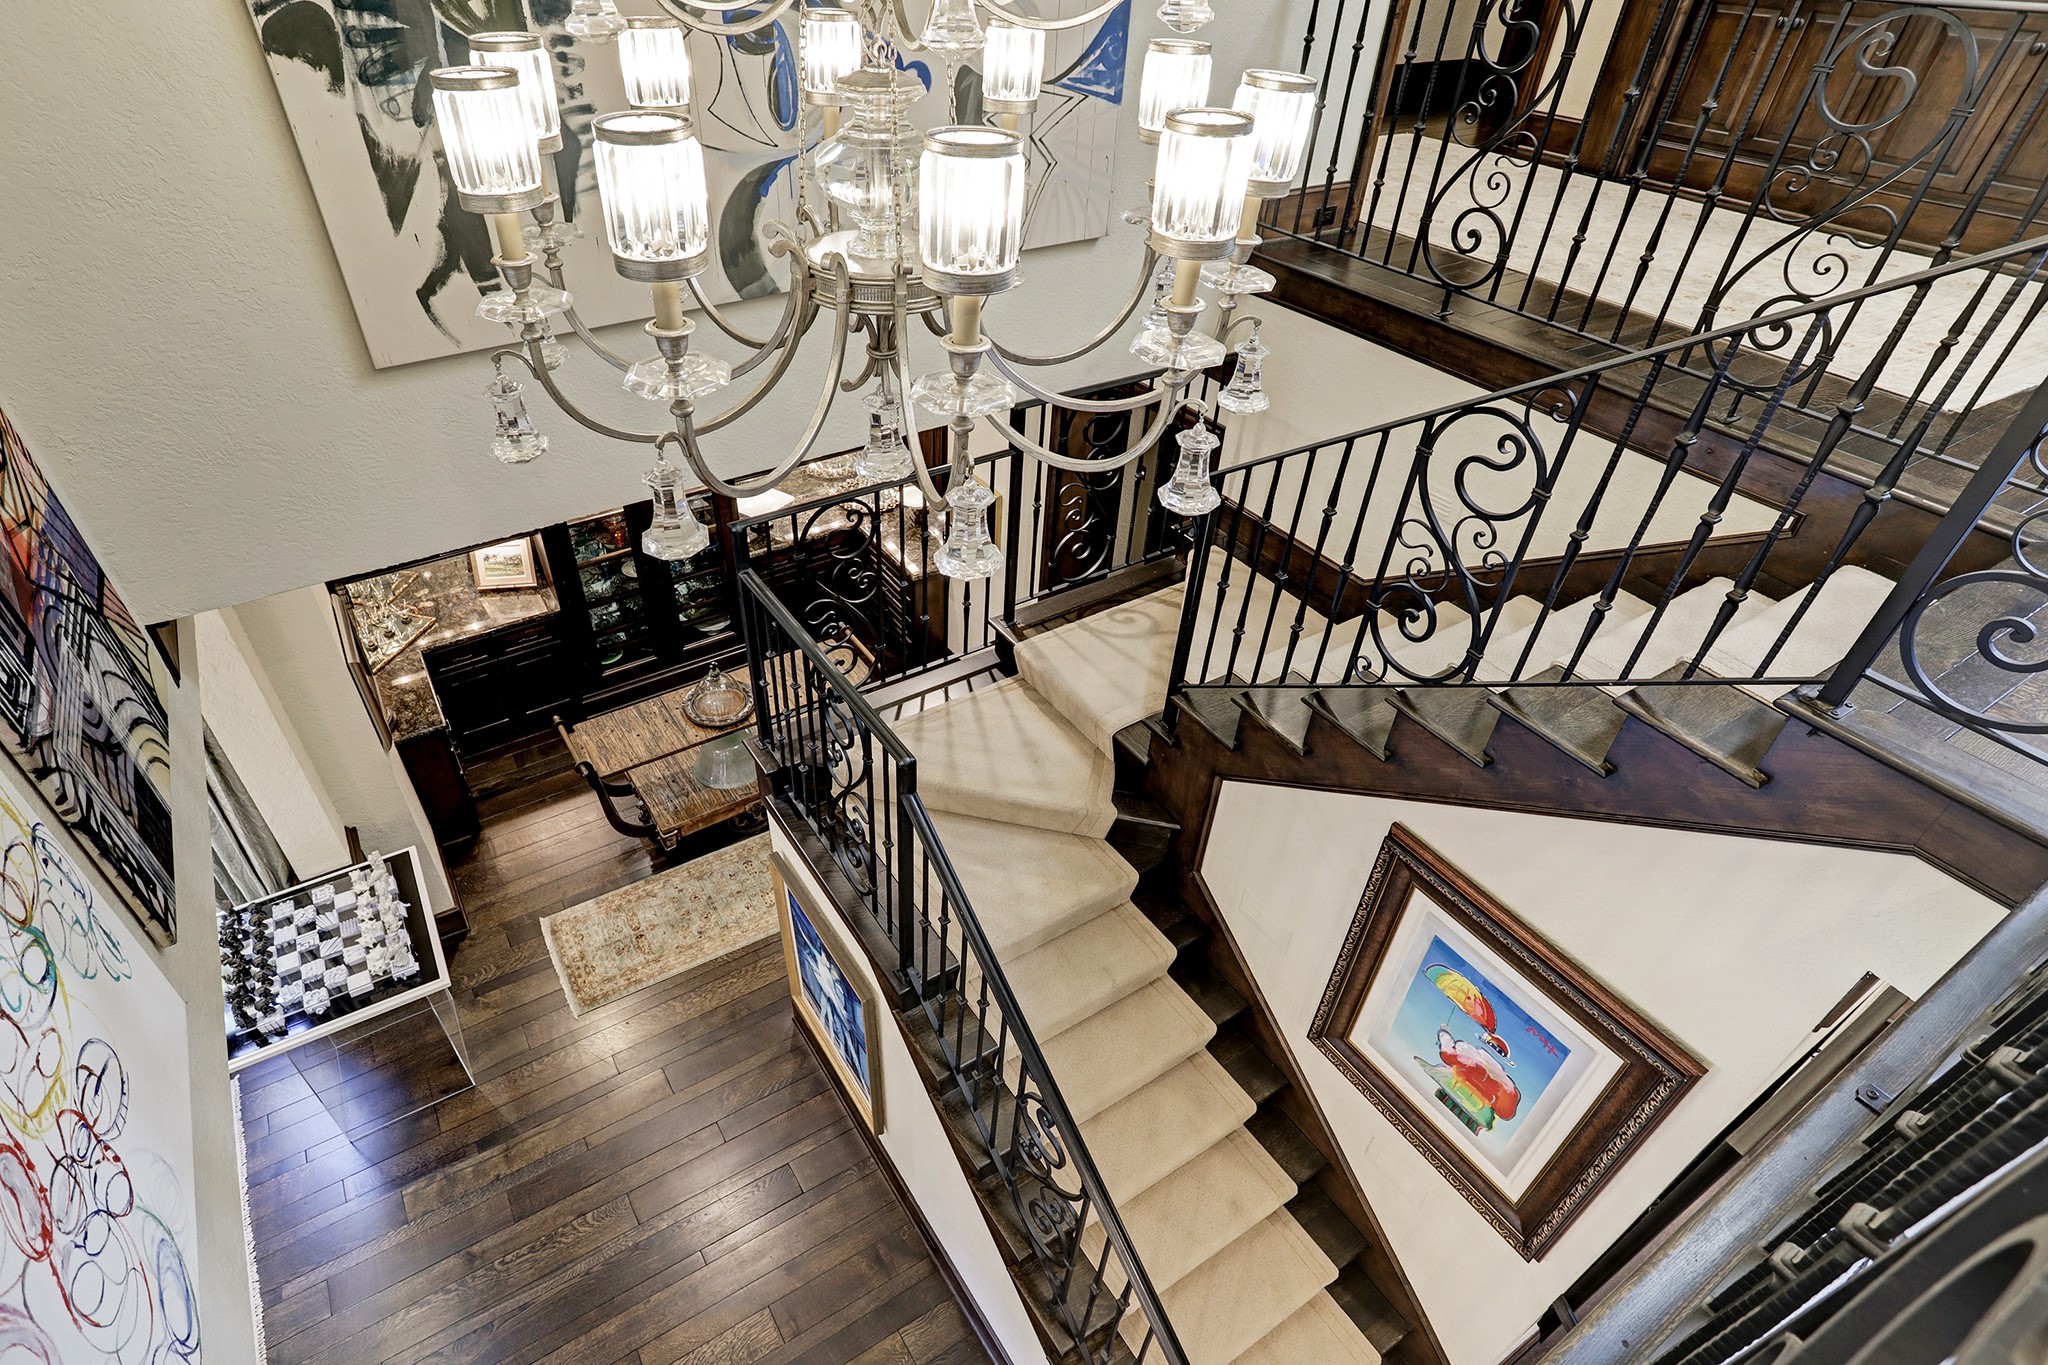 Architecturally Impressive Staircase Highlights the Center of the Home.